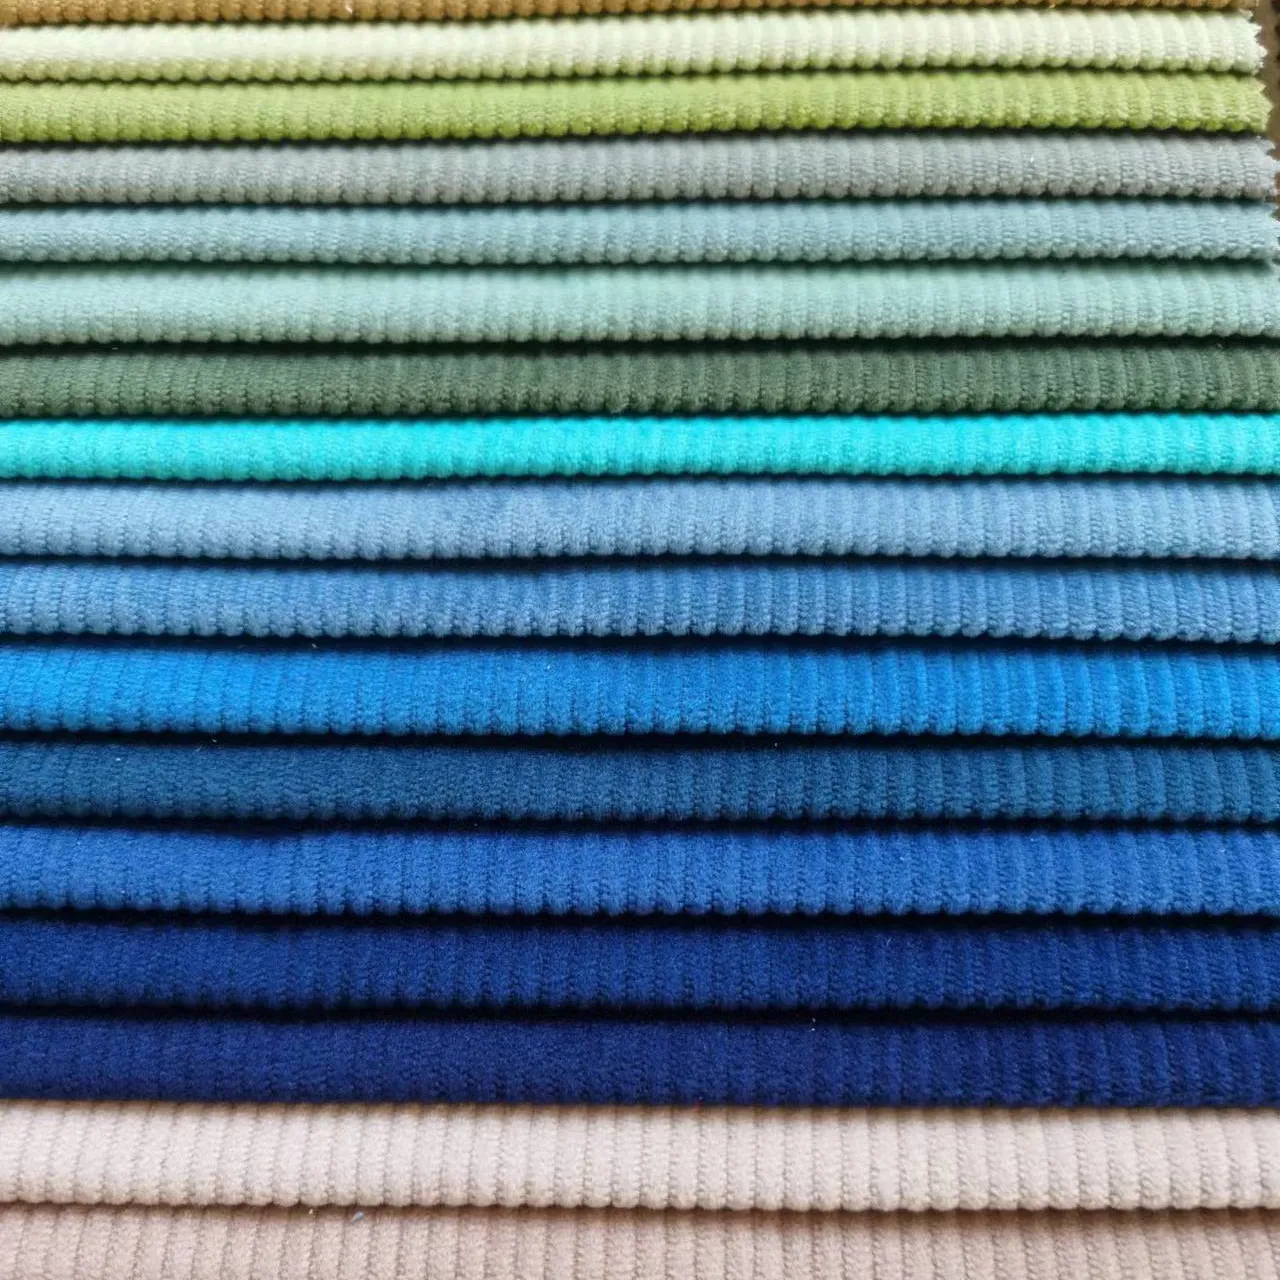 fresh color 200-280gsm 3 crown or 8 wales or 11wales corduroy stripe velvet for cloth